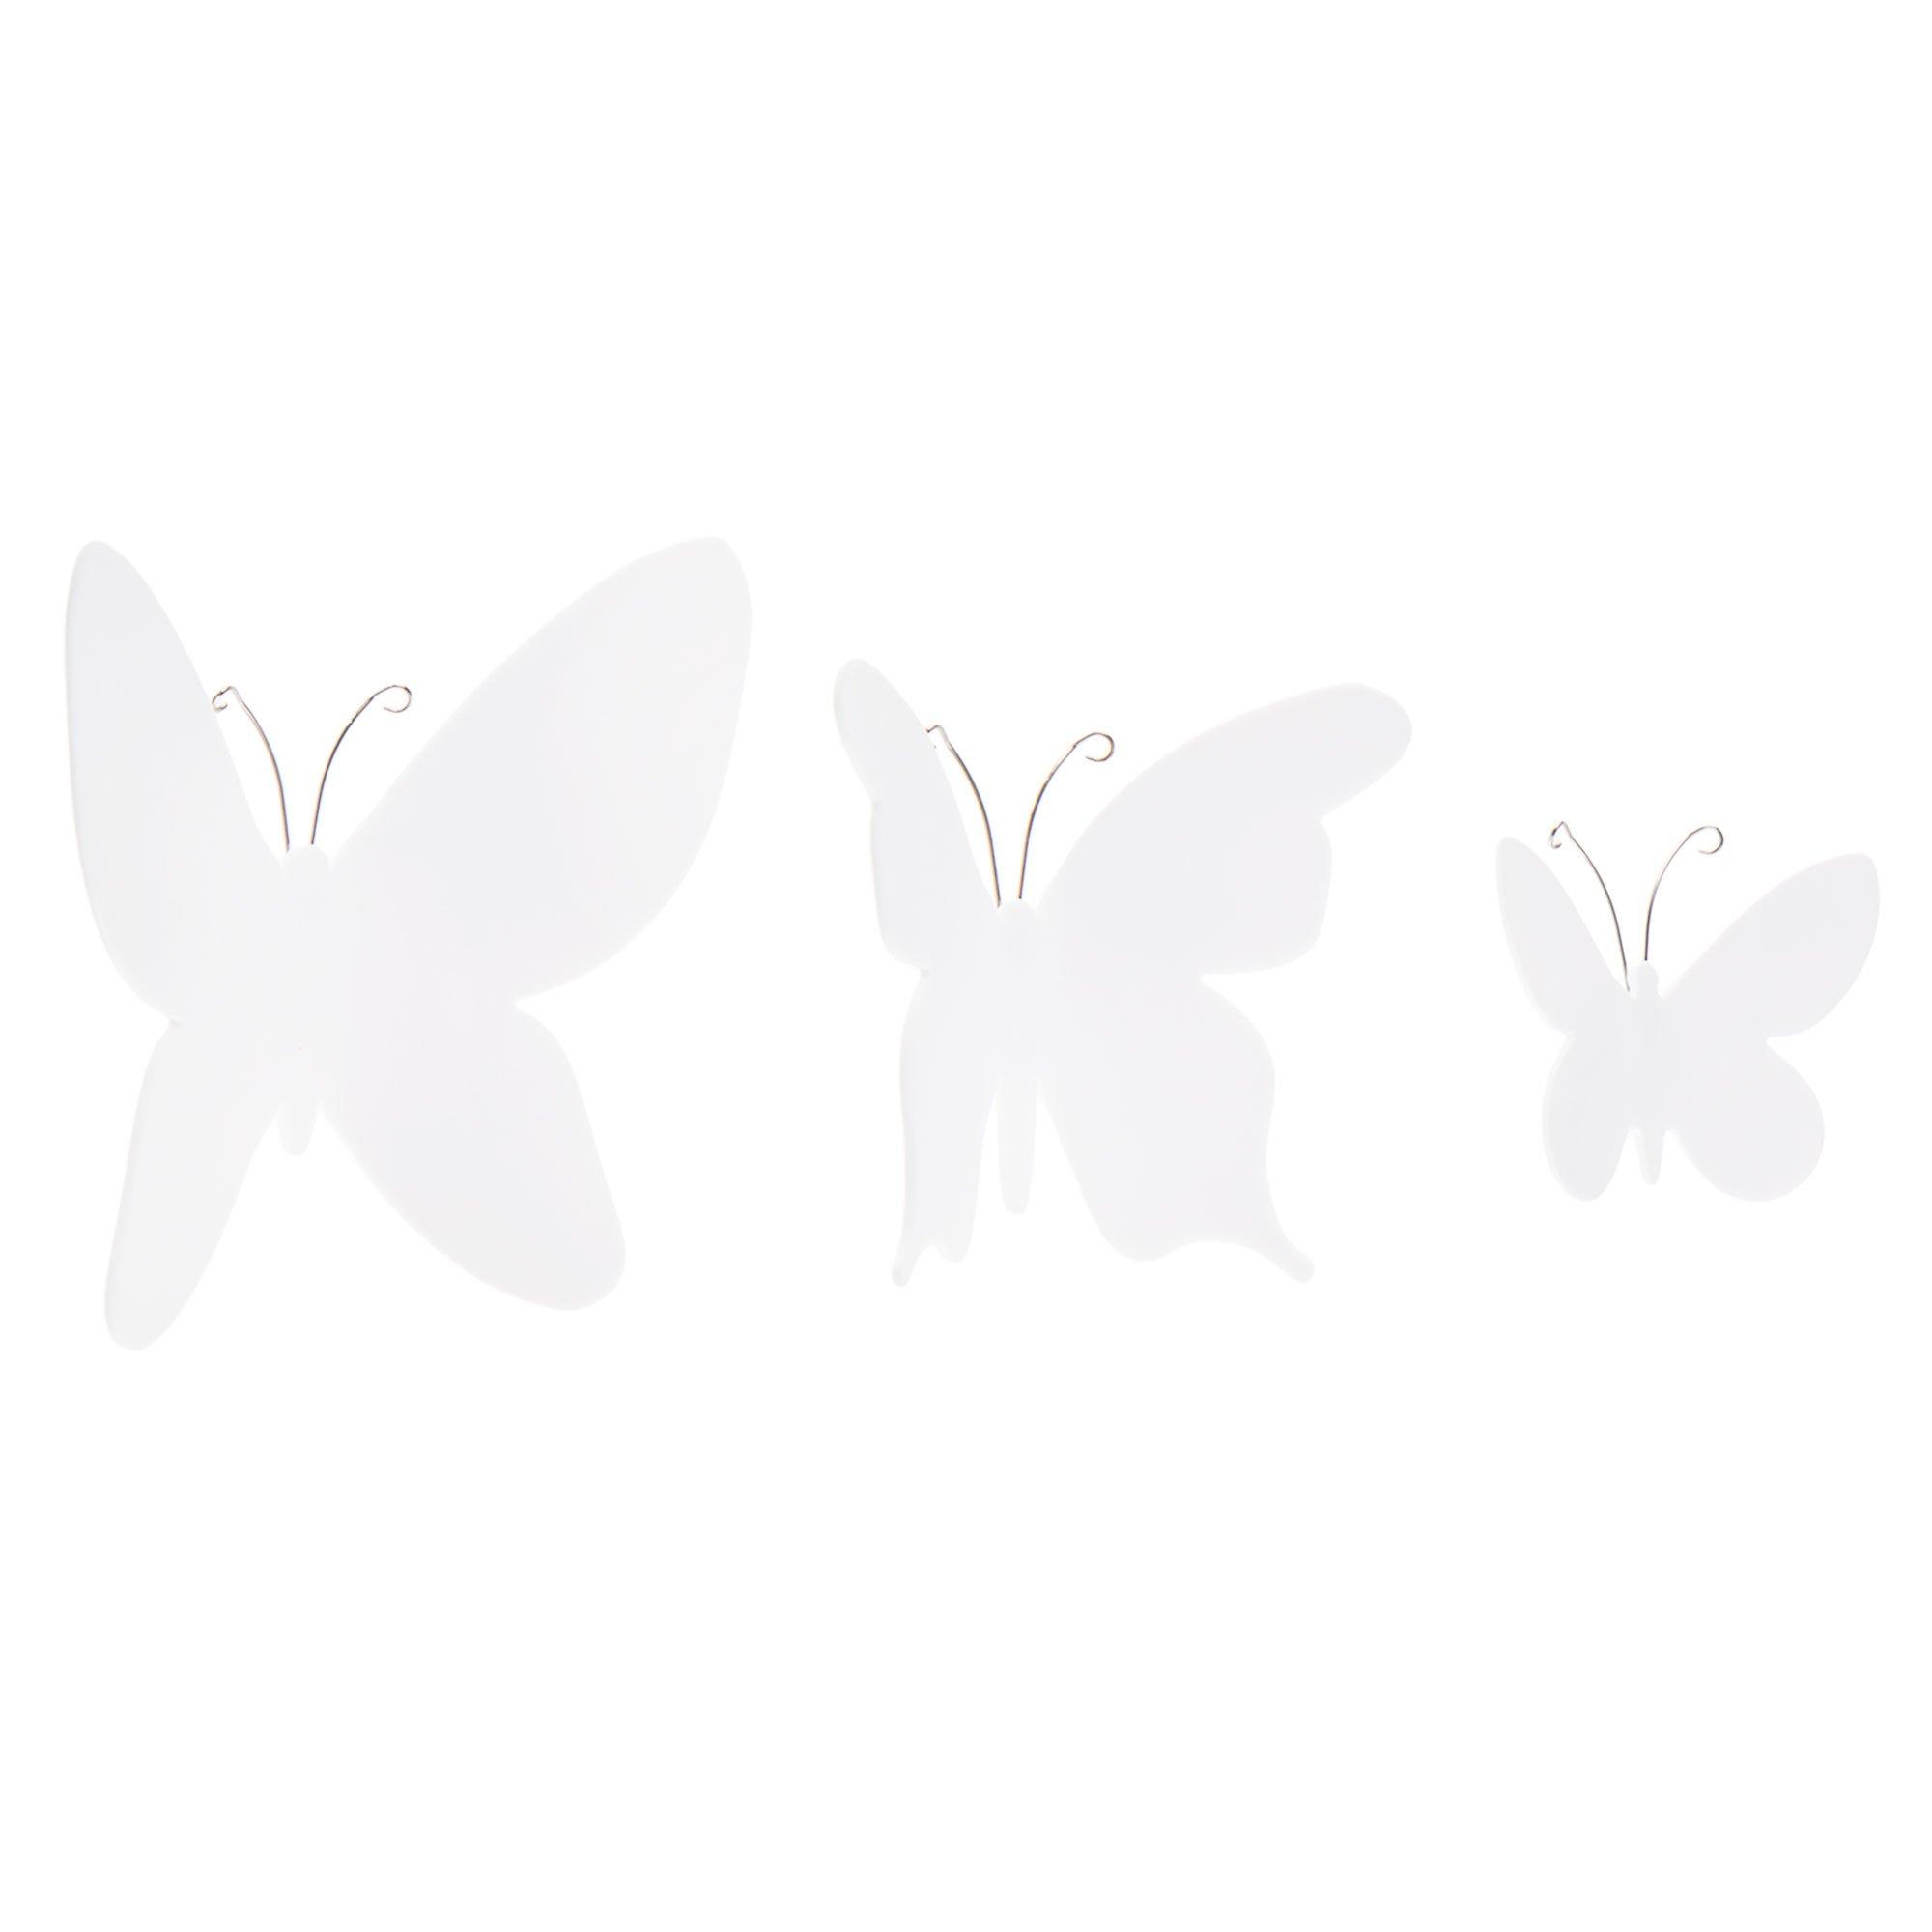 23Pcs Butterflies Stickers Ceiling Window Decor Static Vinyl White Butterfly  Decals Glass Door Art Wall Decoration for Home Room